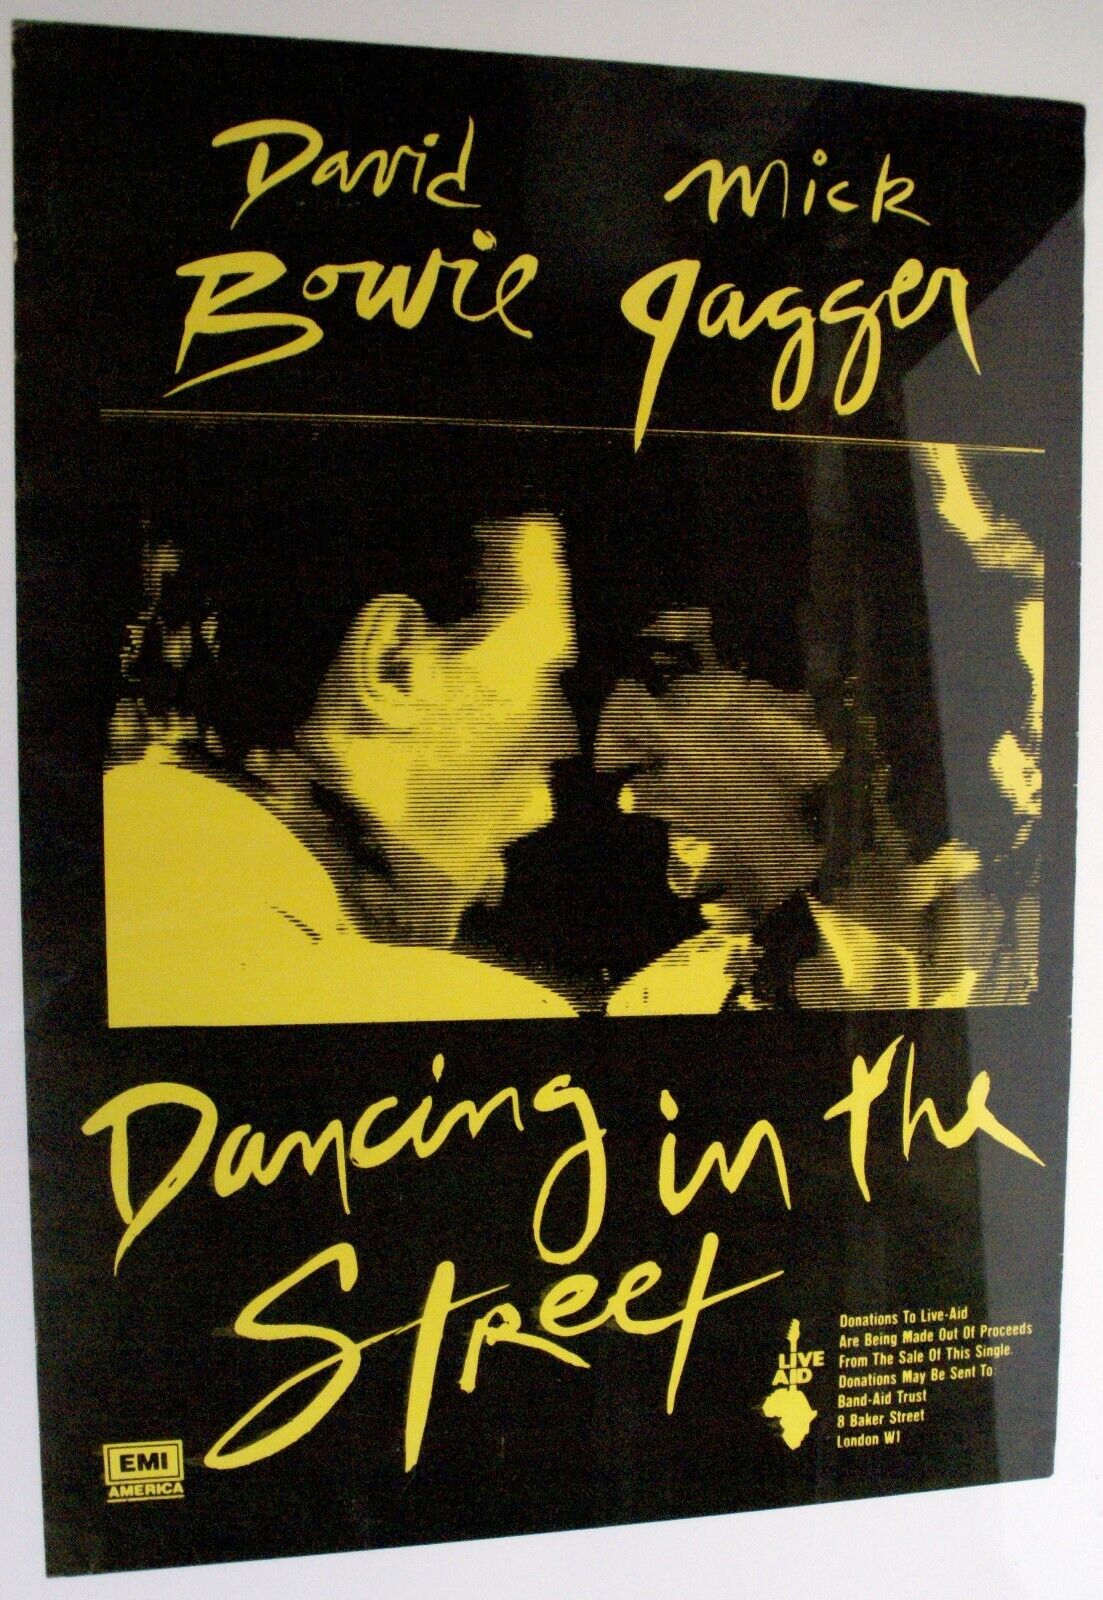 David Bowie Mick Jagger Poster Original US Promo  Dancing In The Street 1985